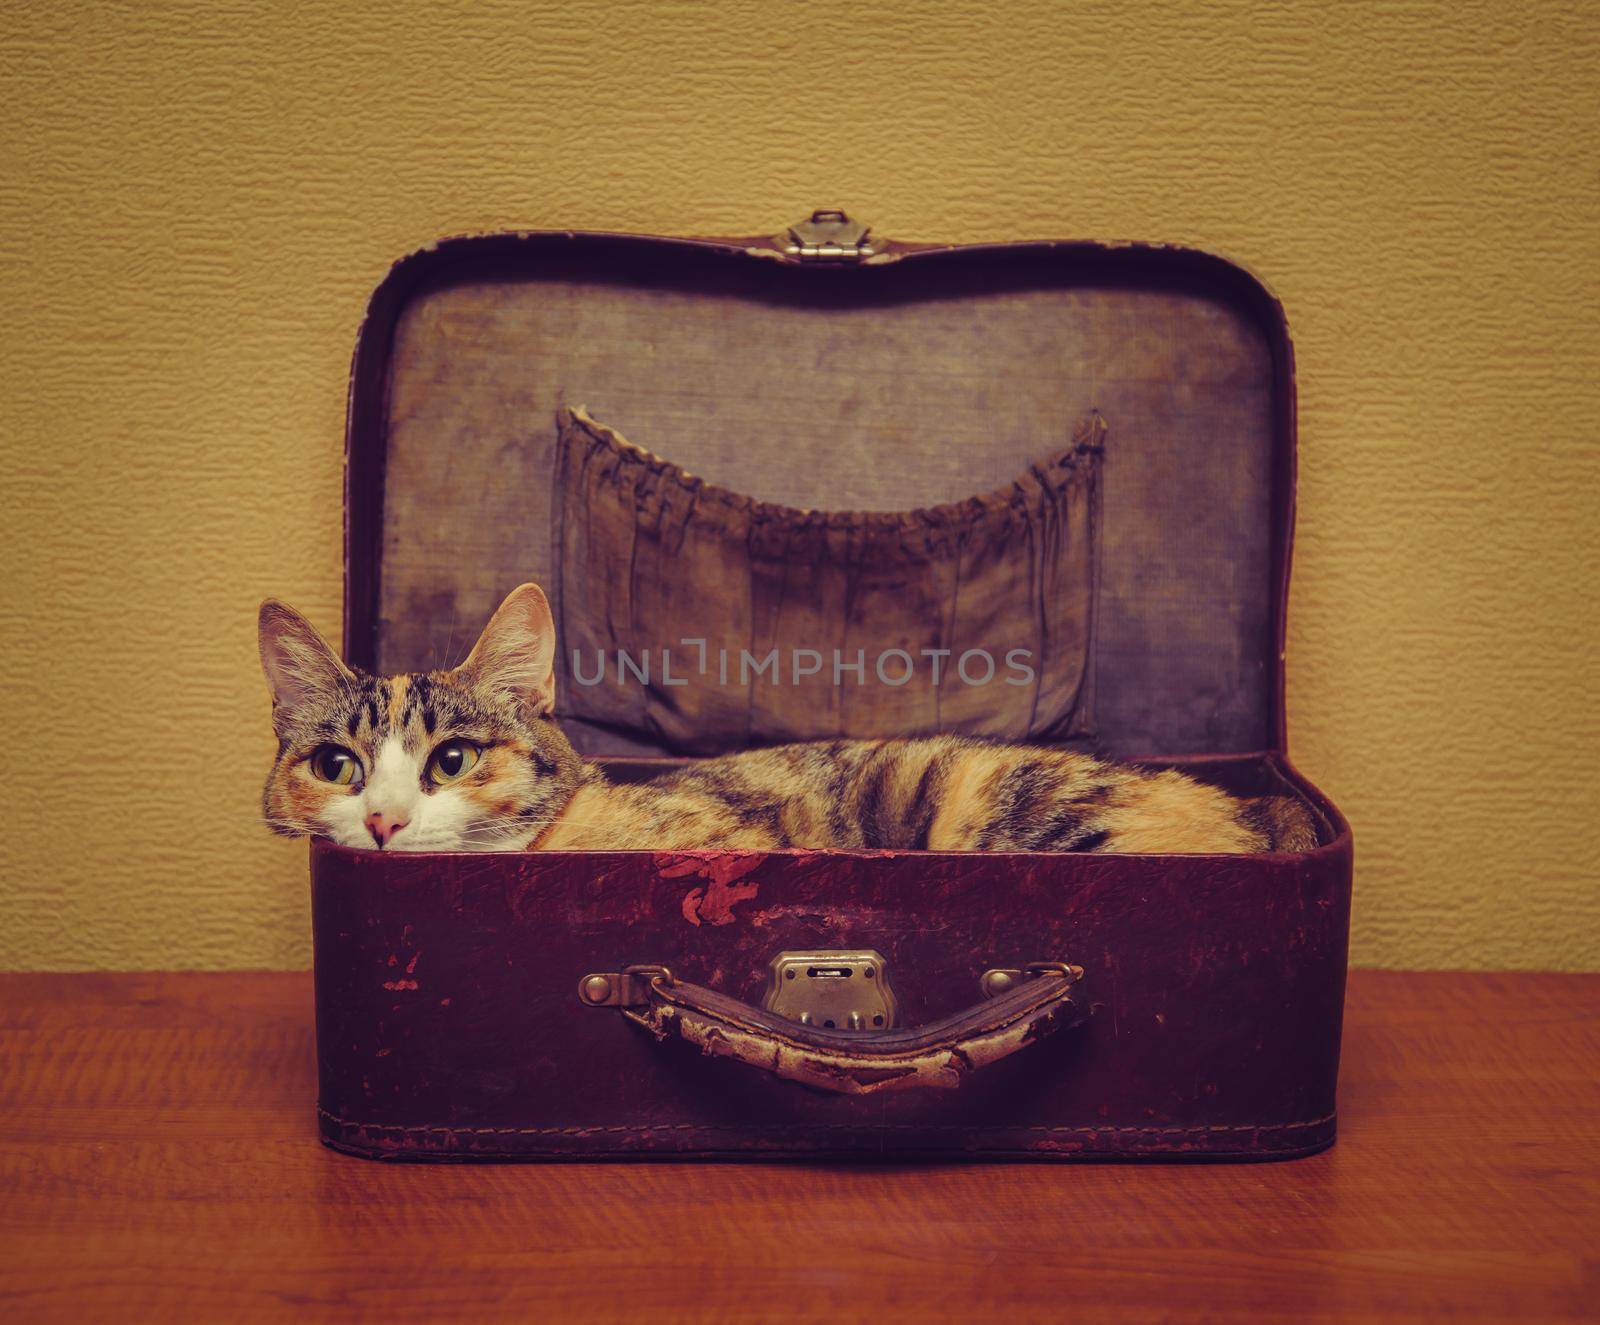 Cute cat of tortoiseshell color lying in a vintage small suitcase indoor